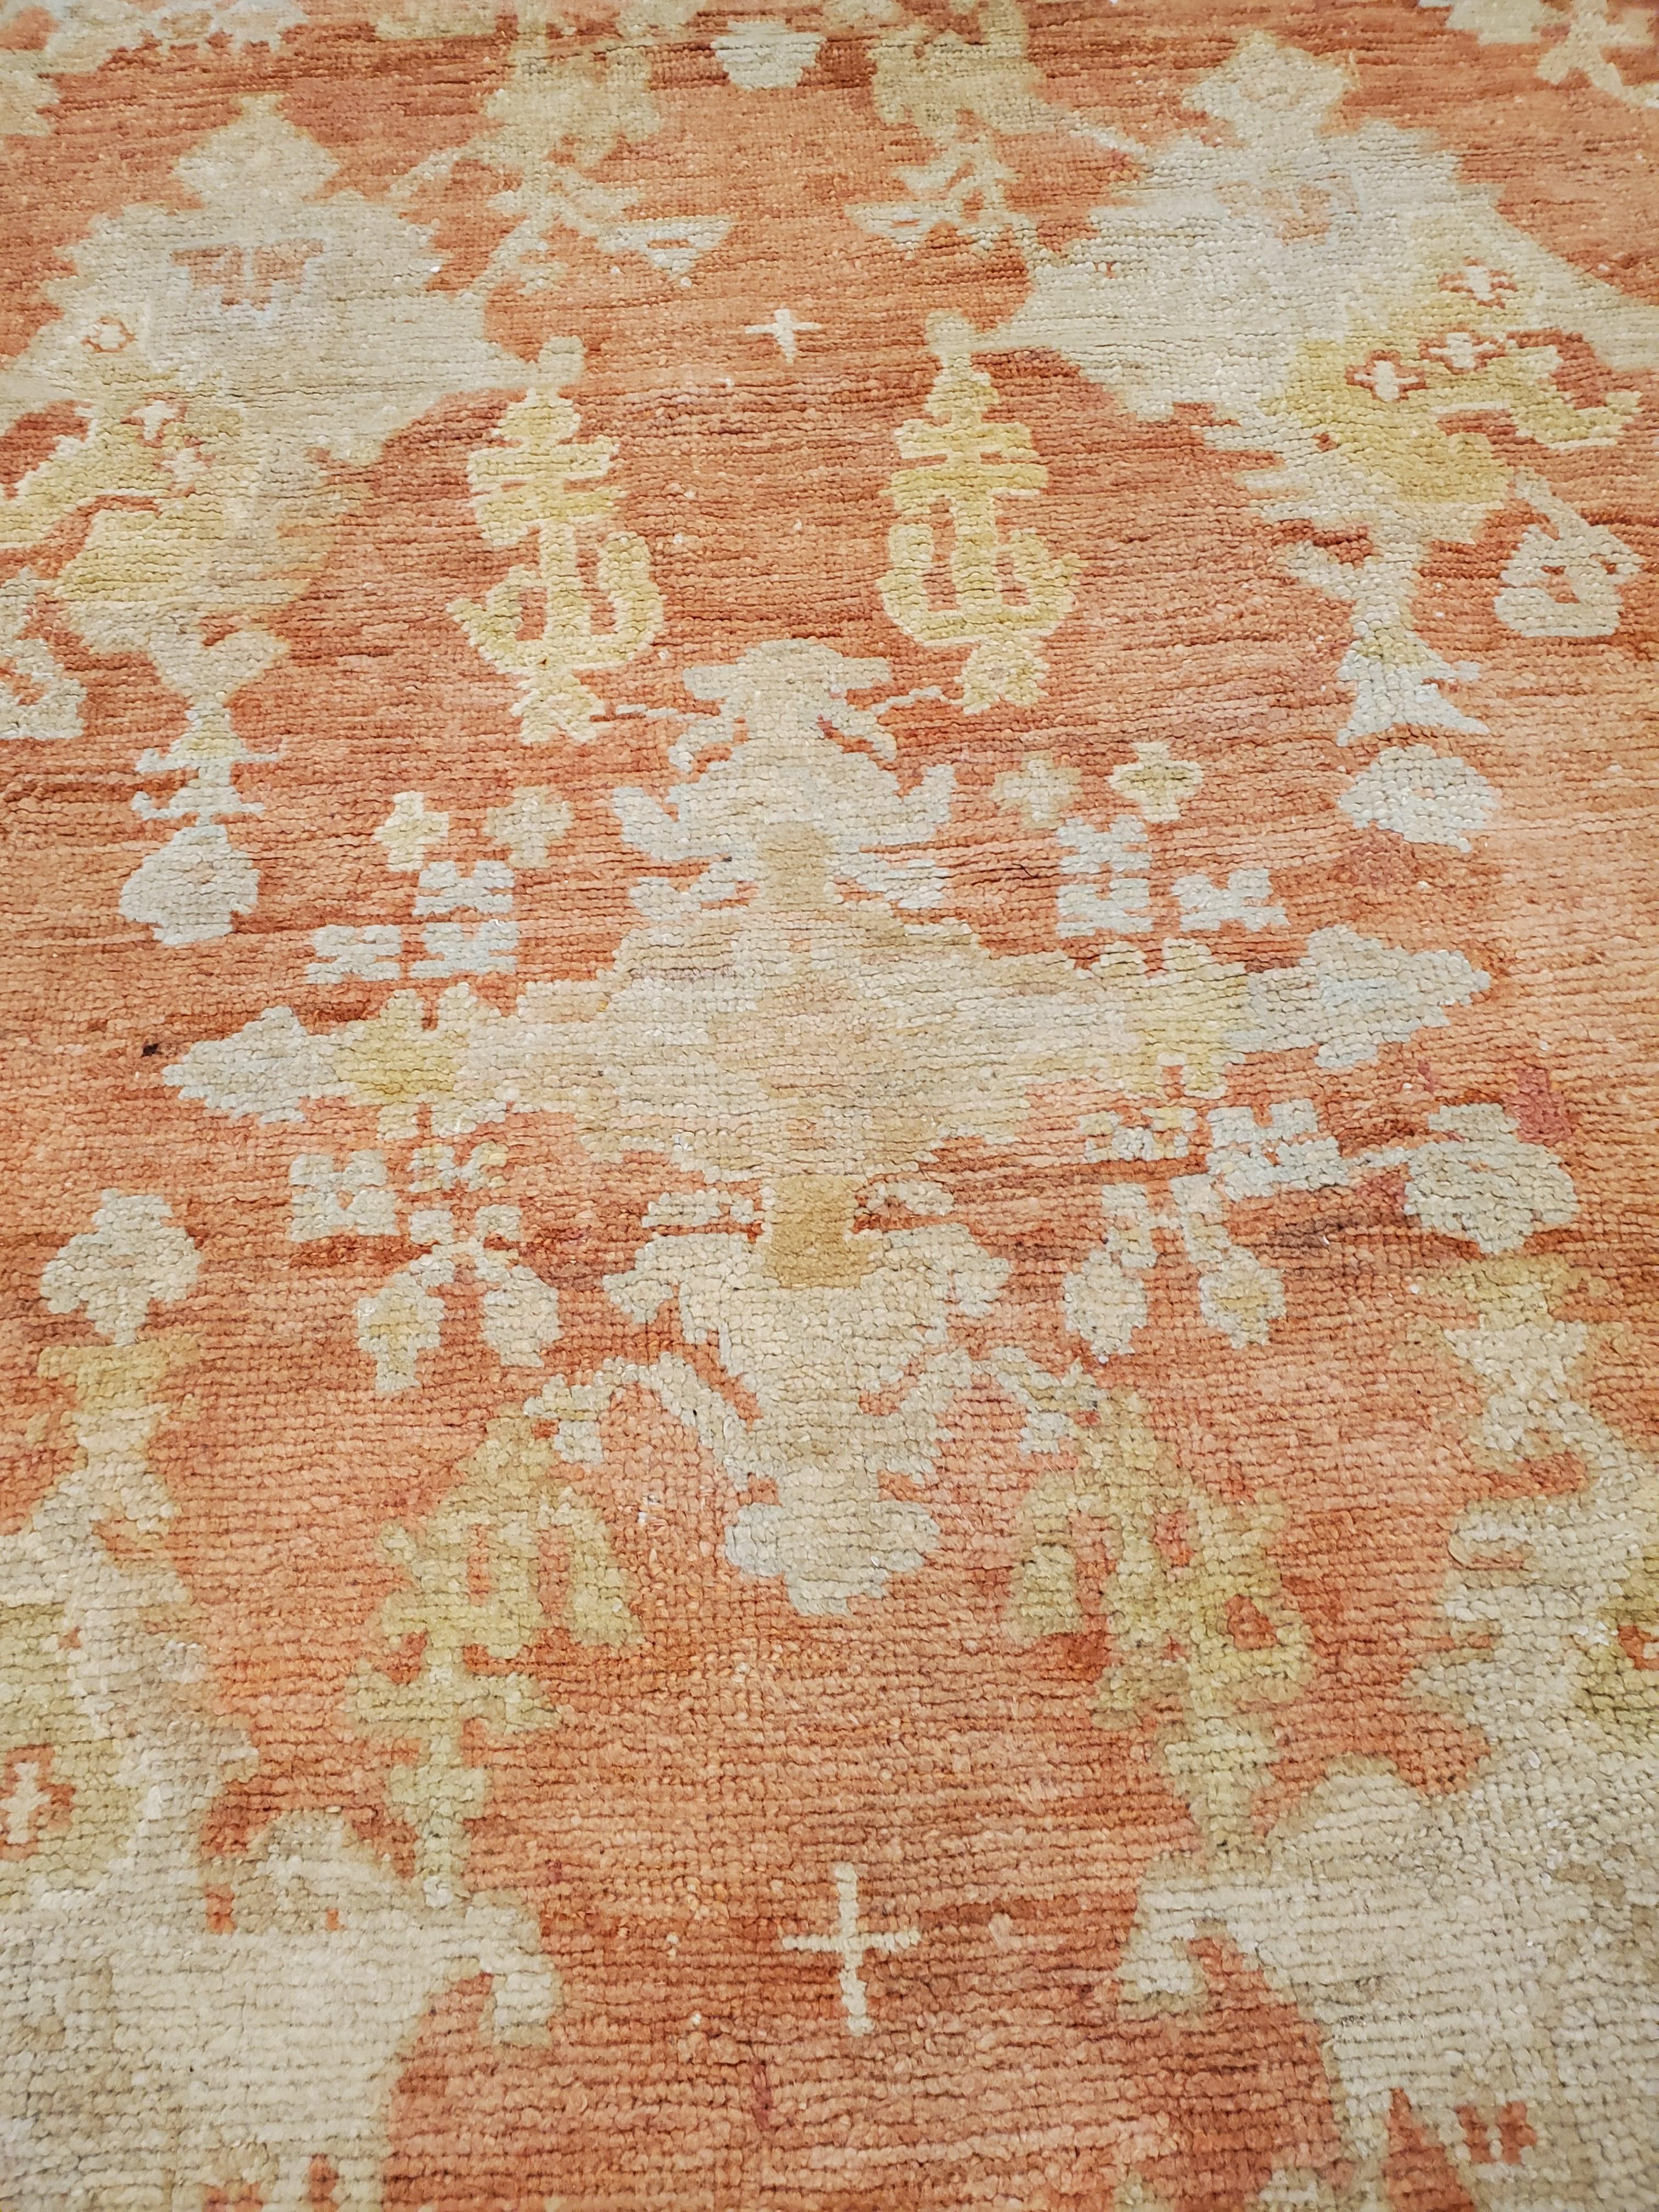 Oushak rugs, also known as Ushak rugs, are woven in Western Turkey and have distinct designs, such as angular large-scale floral patterns. They usually evoke a calmness and peacefulness in a room. To this day, production of Oushak rugs continues